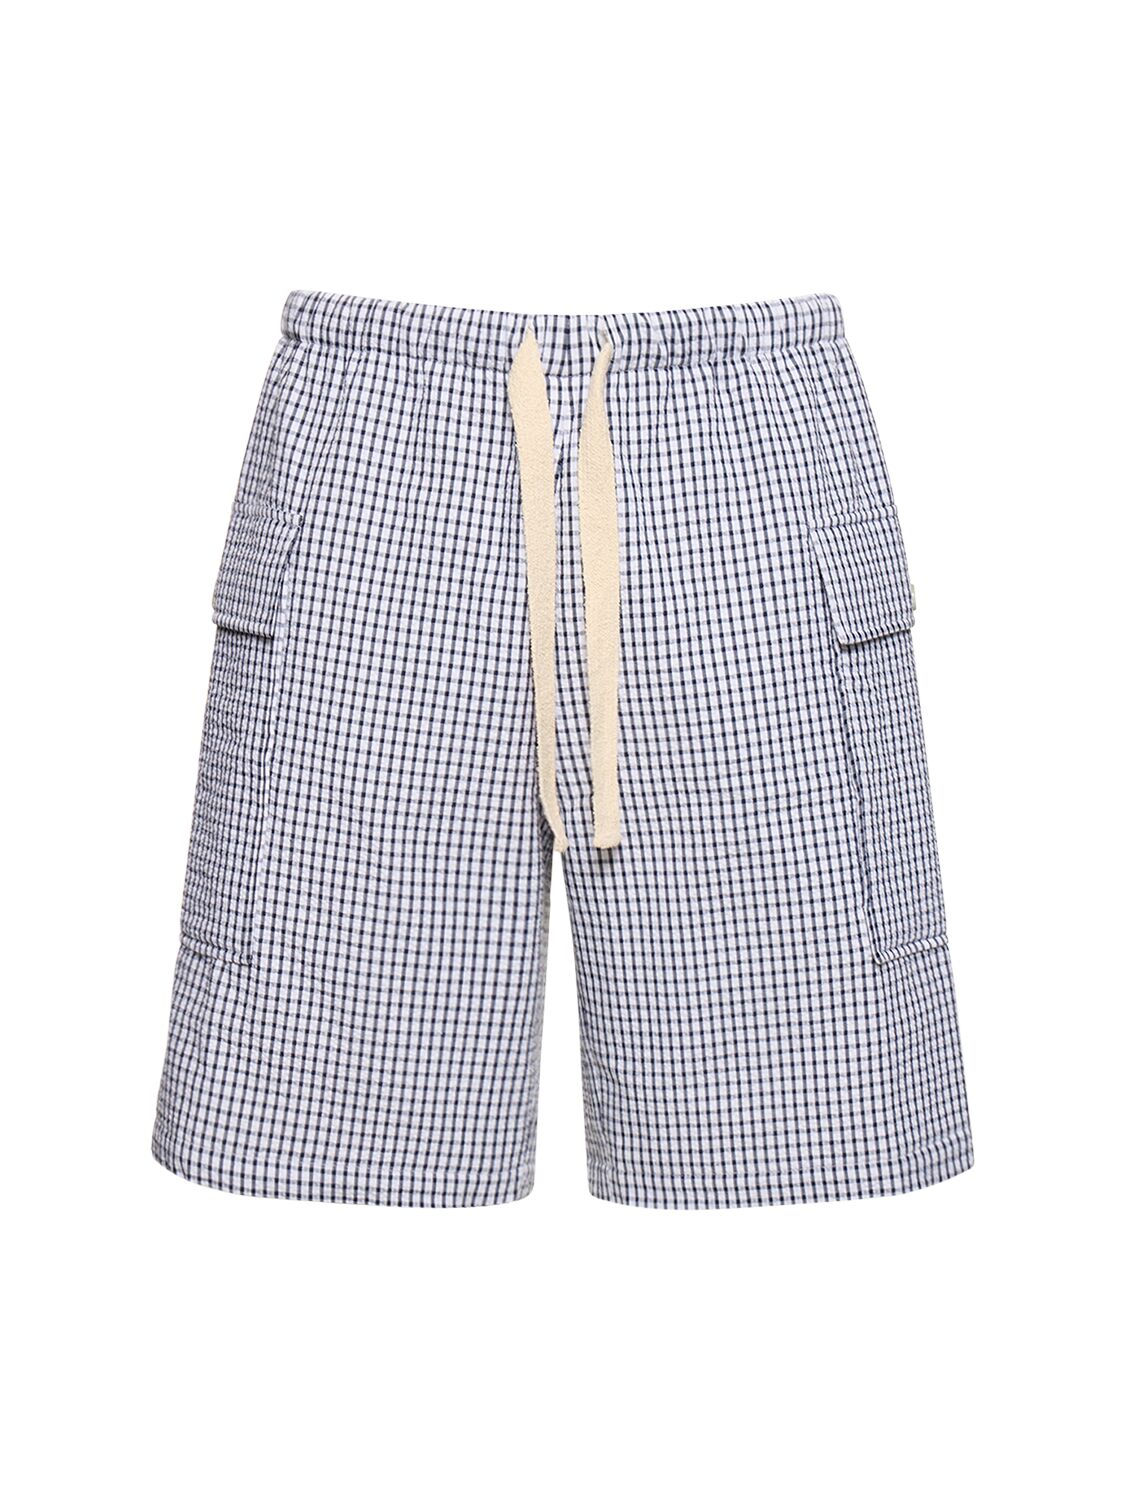 Image of Wide Check Cargo Shorts